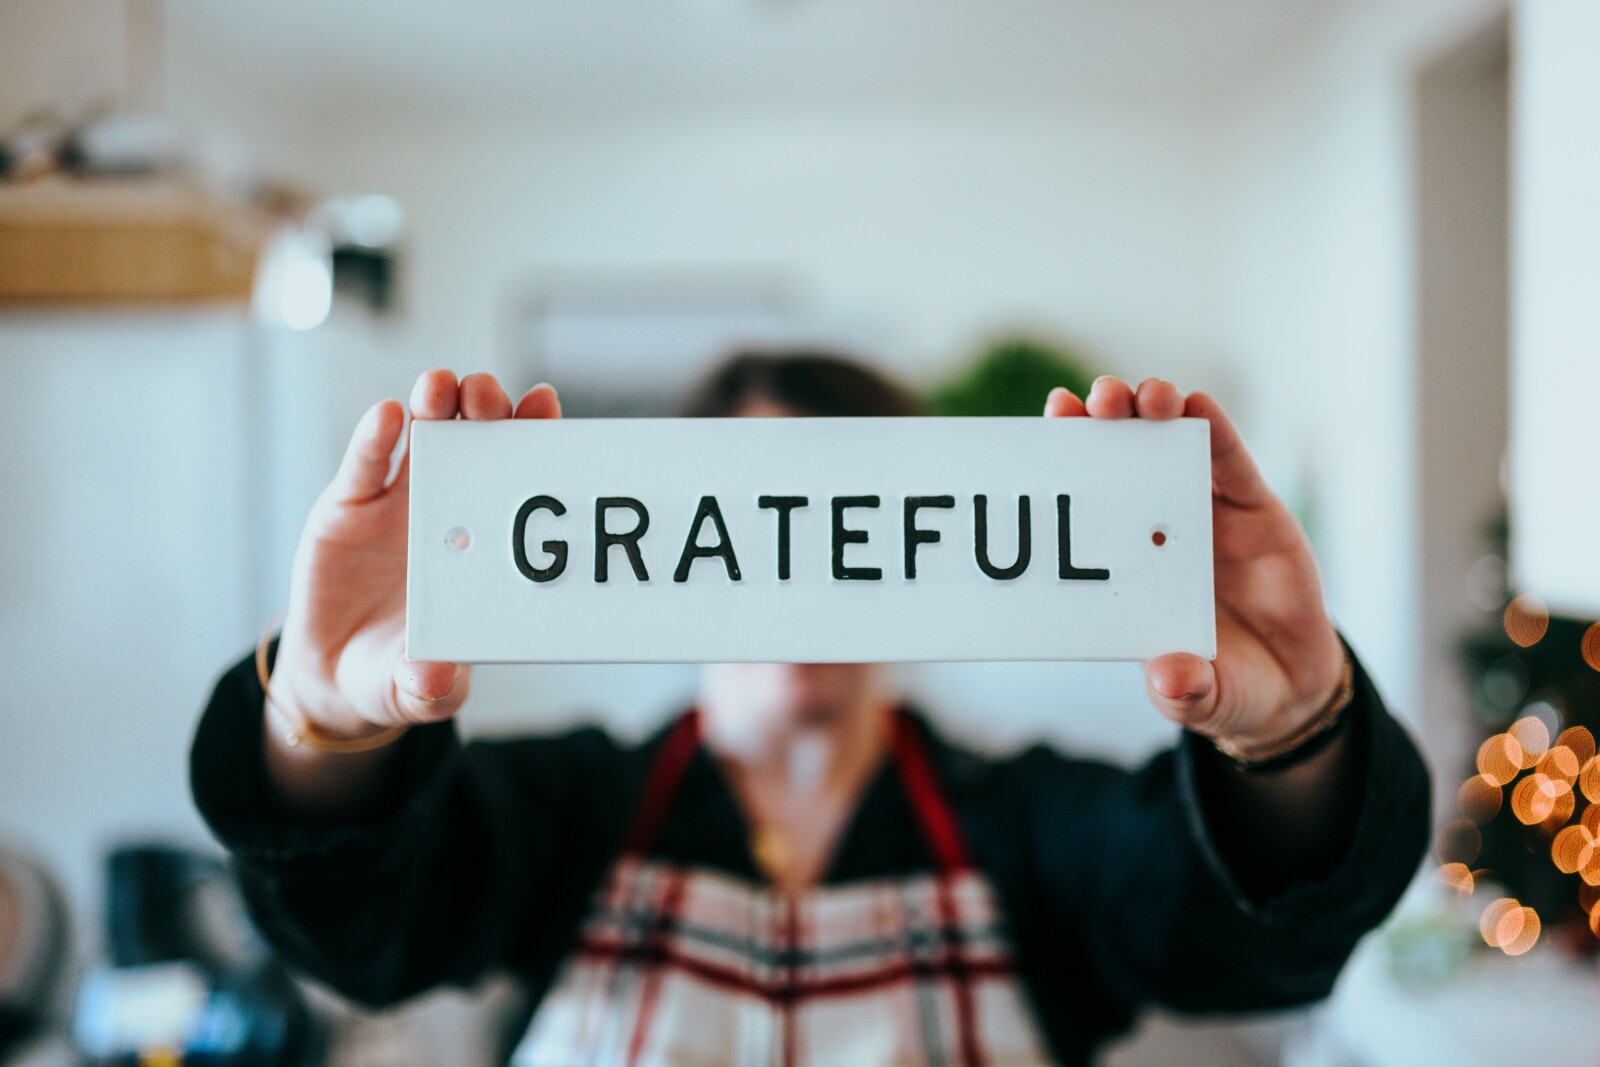 6 Ways to Show Gratitude While Boosting Your Immune System